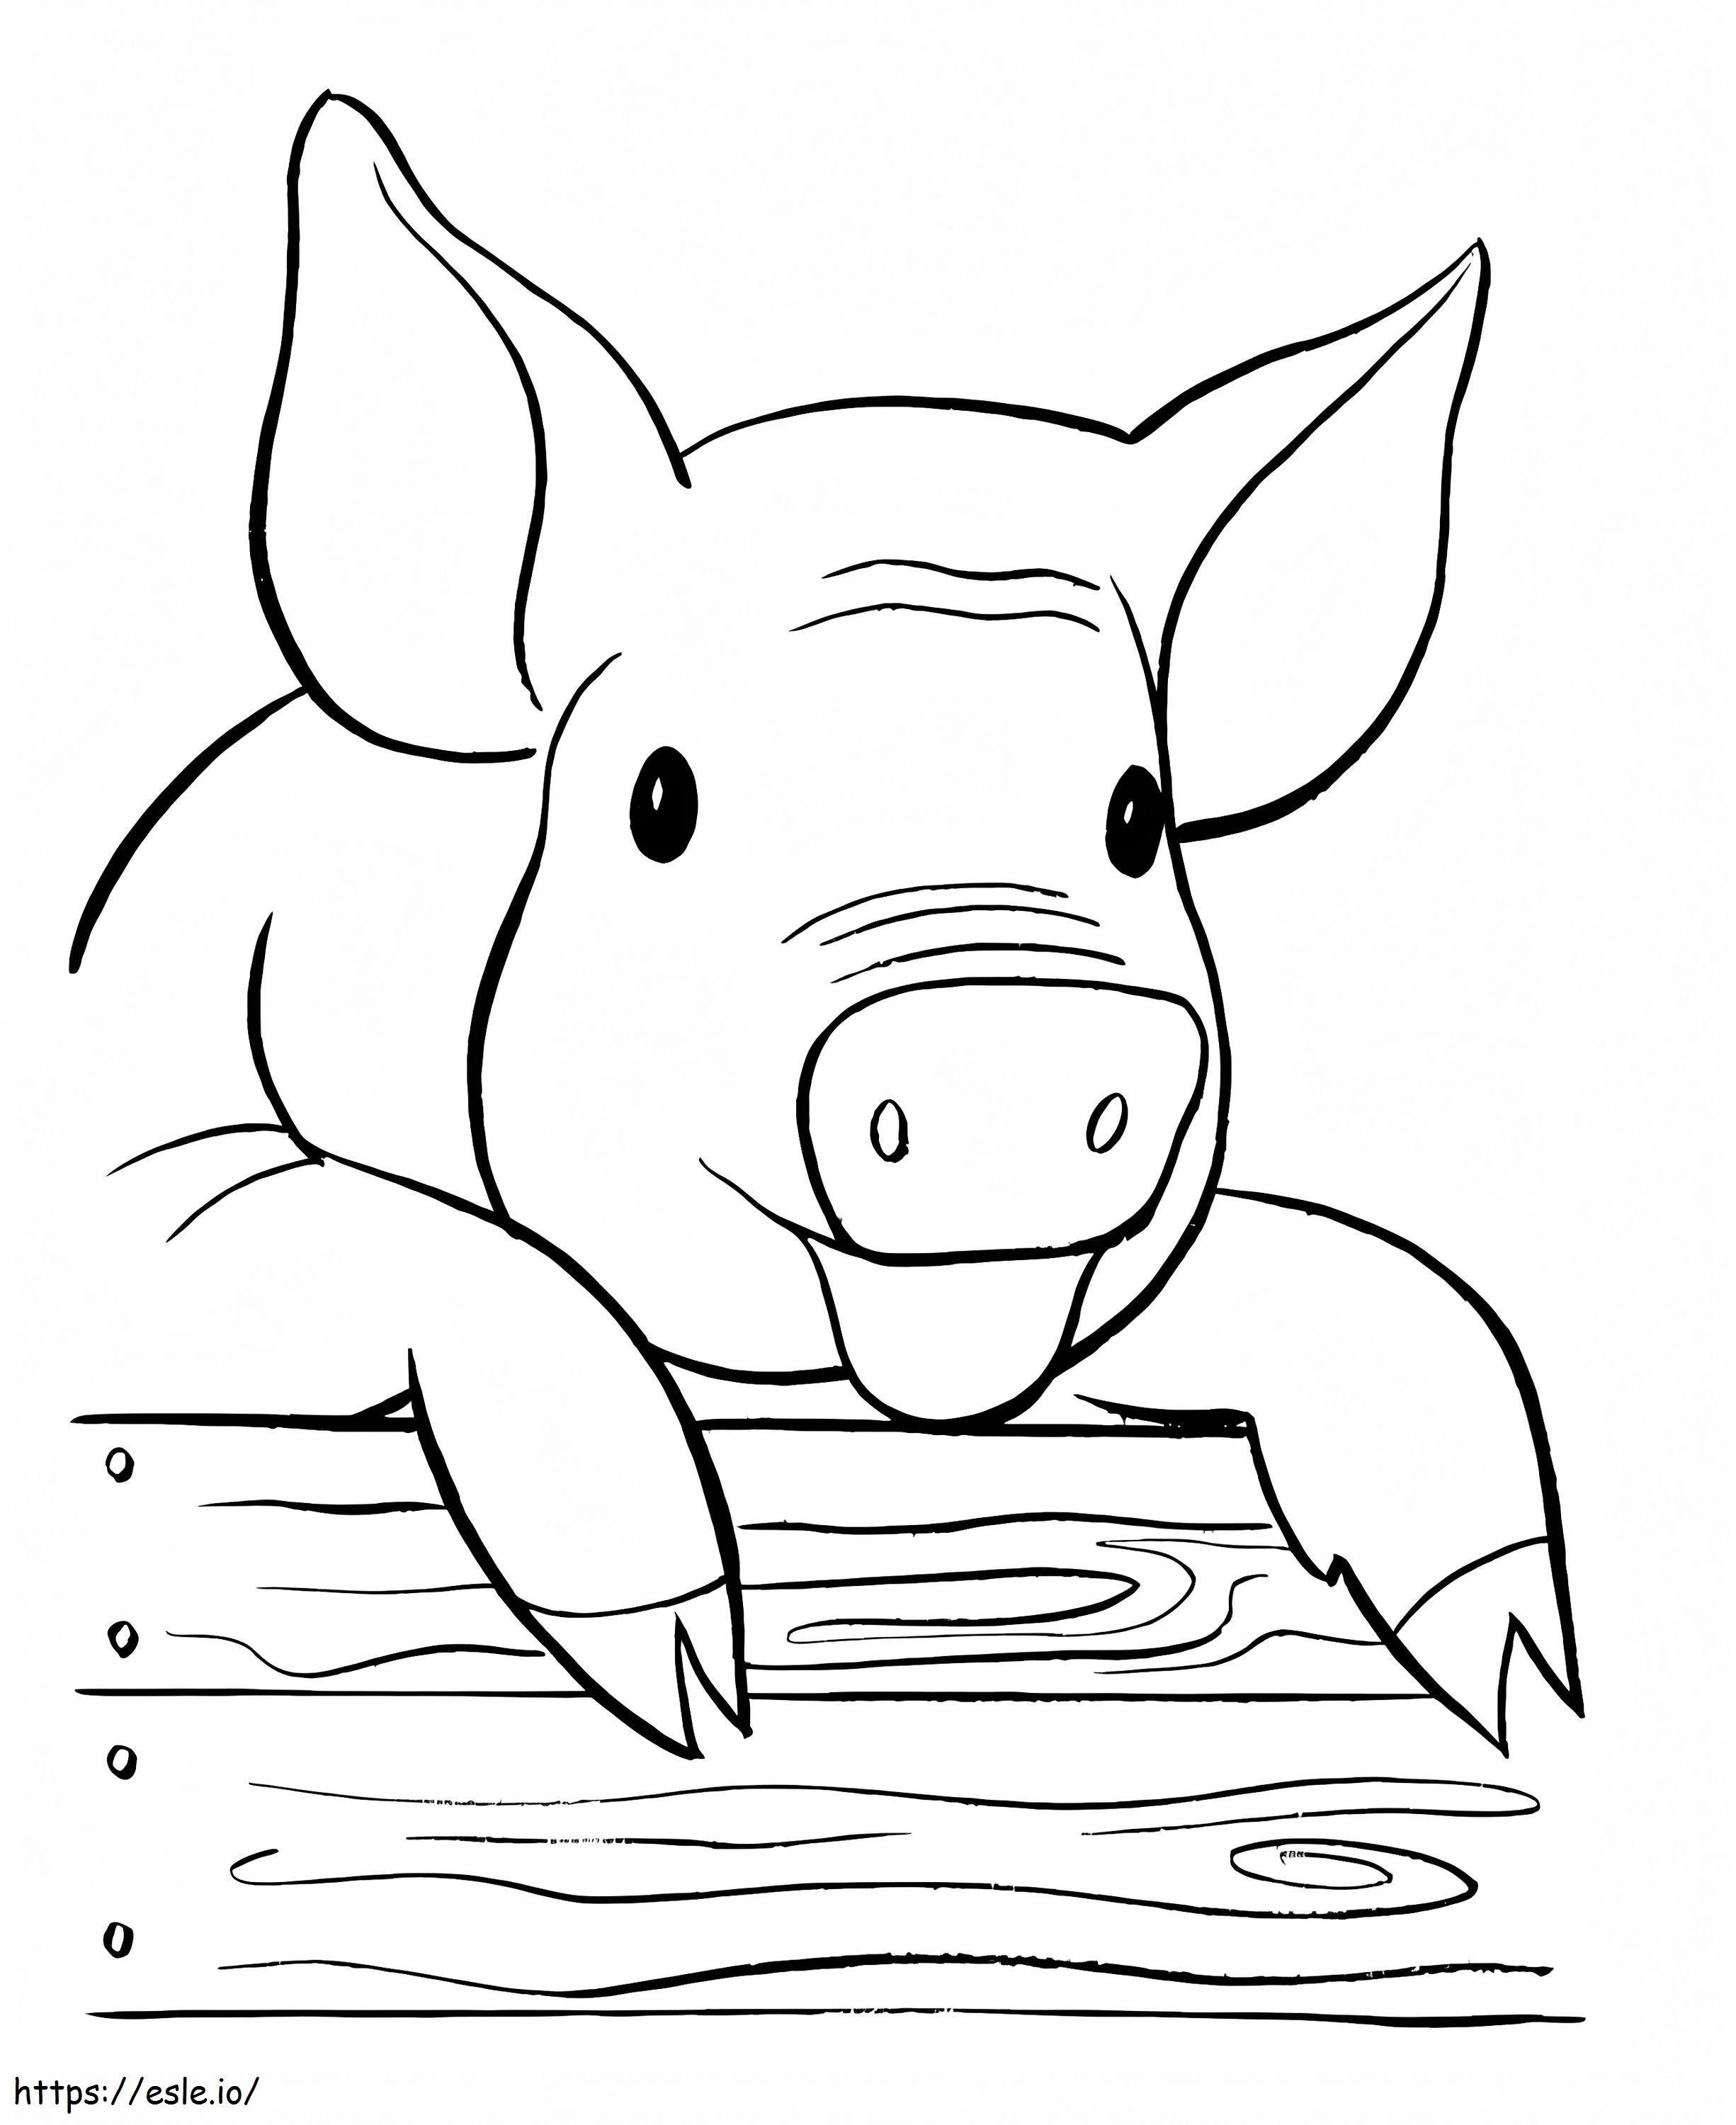 Pig 2 coloring page